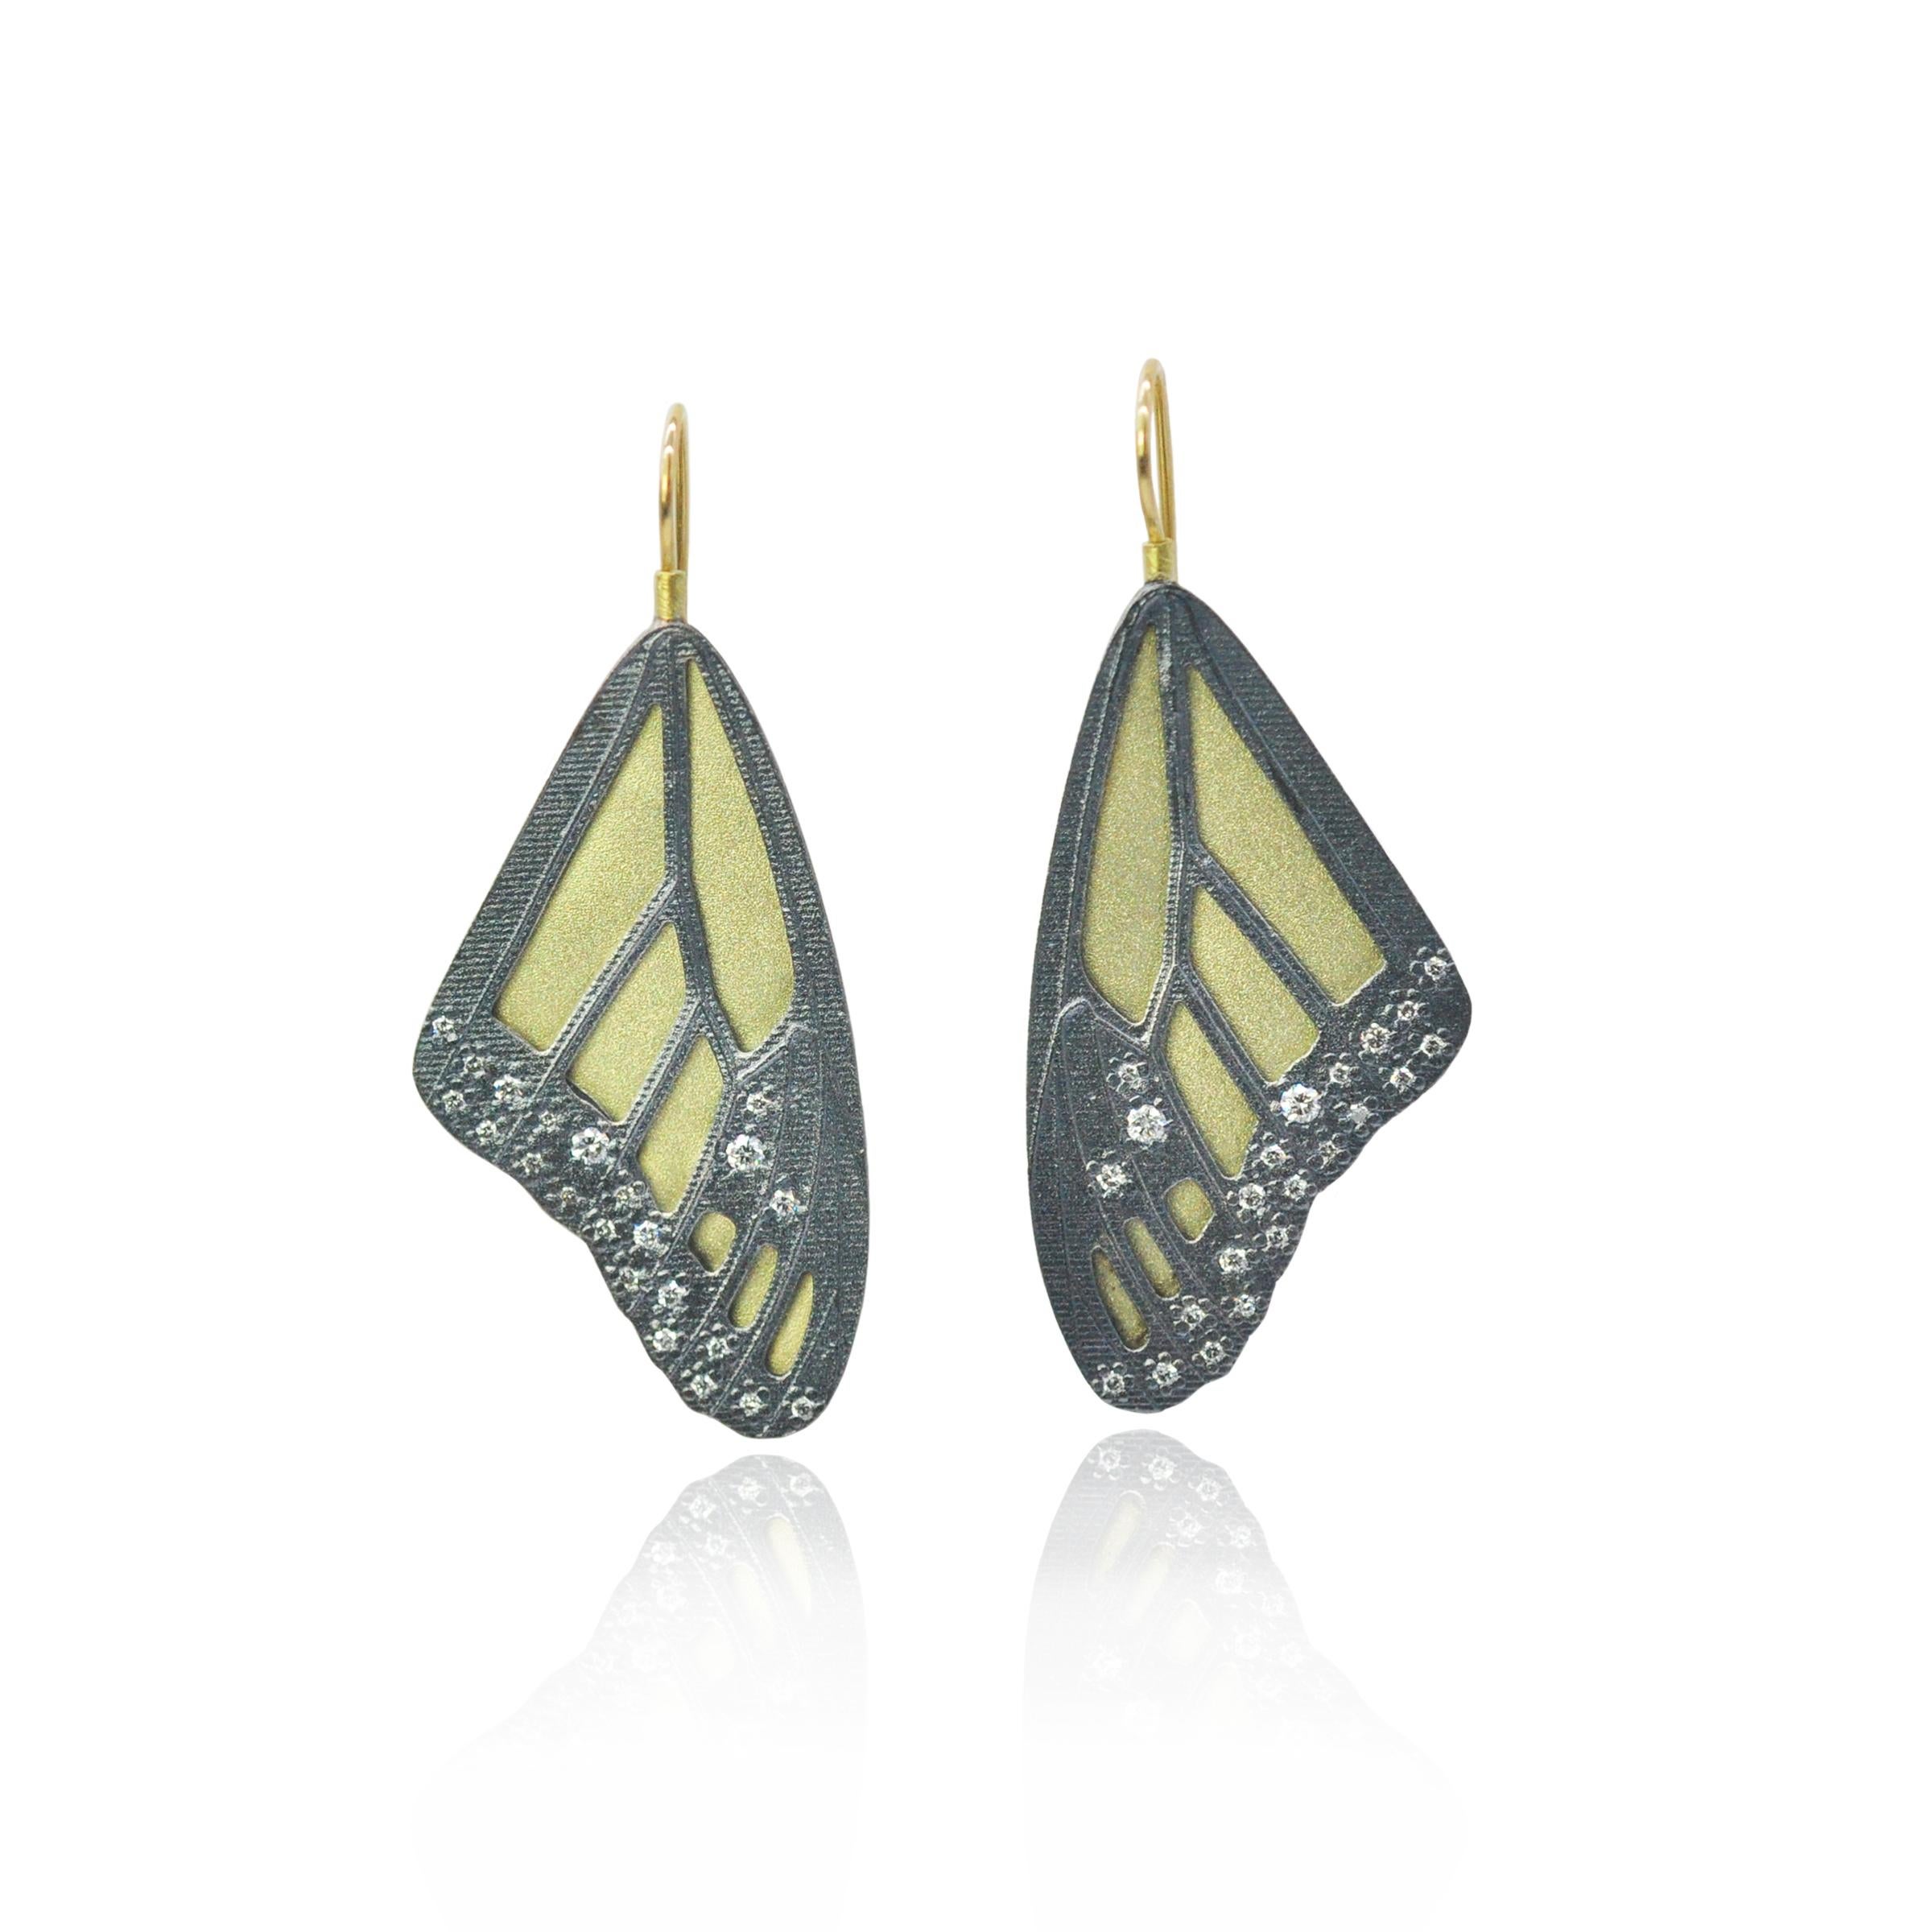 A true Rebecca Myers Design signature piece, our monarch butterfly wing designs are modeled after nature's masterpiece and hand crafted with the highest quality materials. Oxidized sterling silver is layered over 18k yellow gold, with sparkling pave